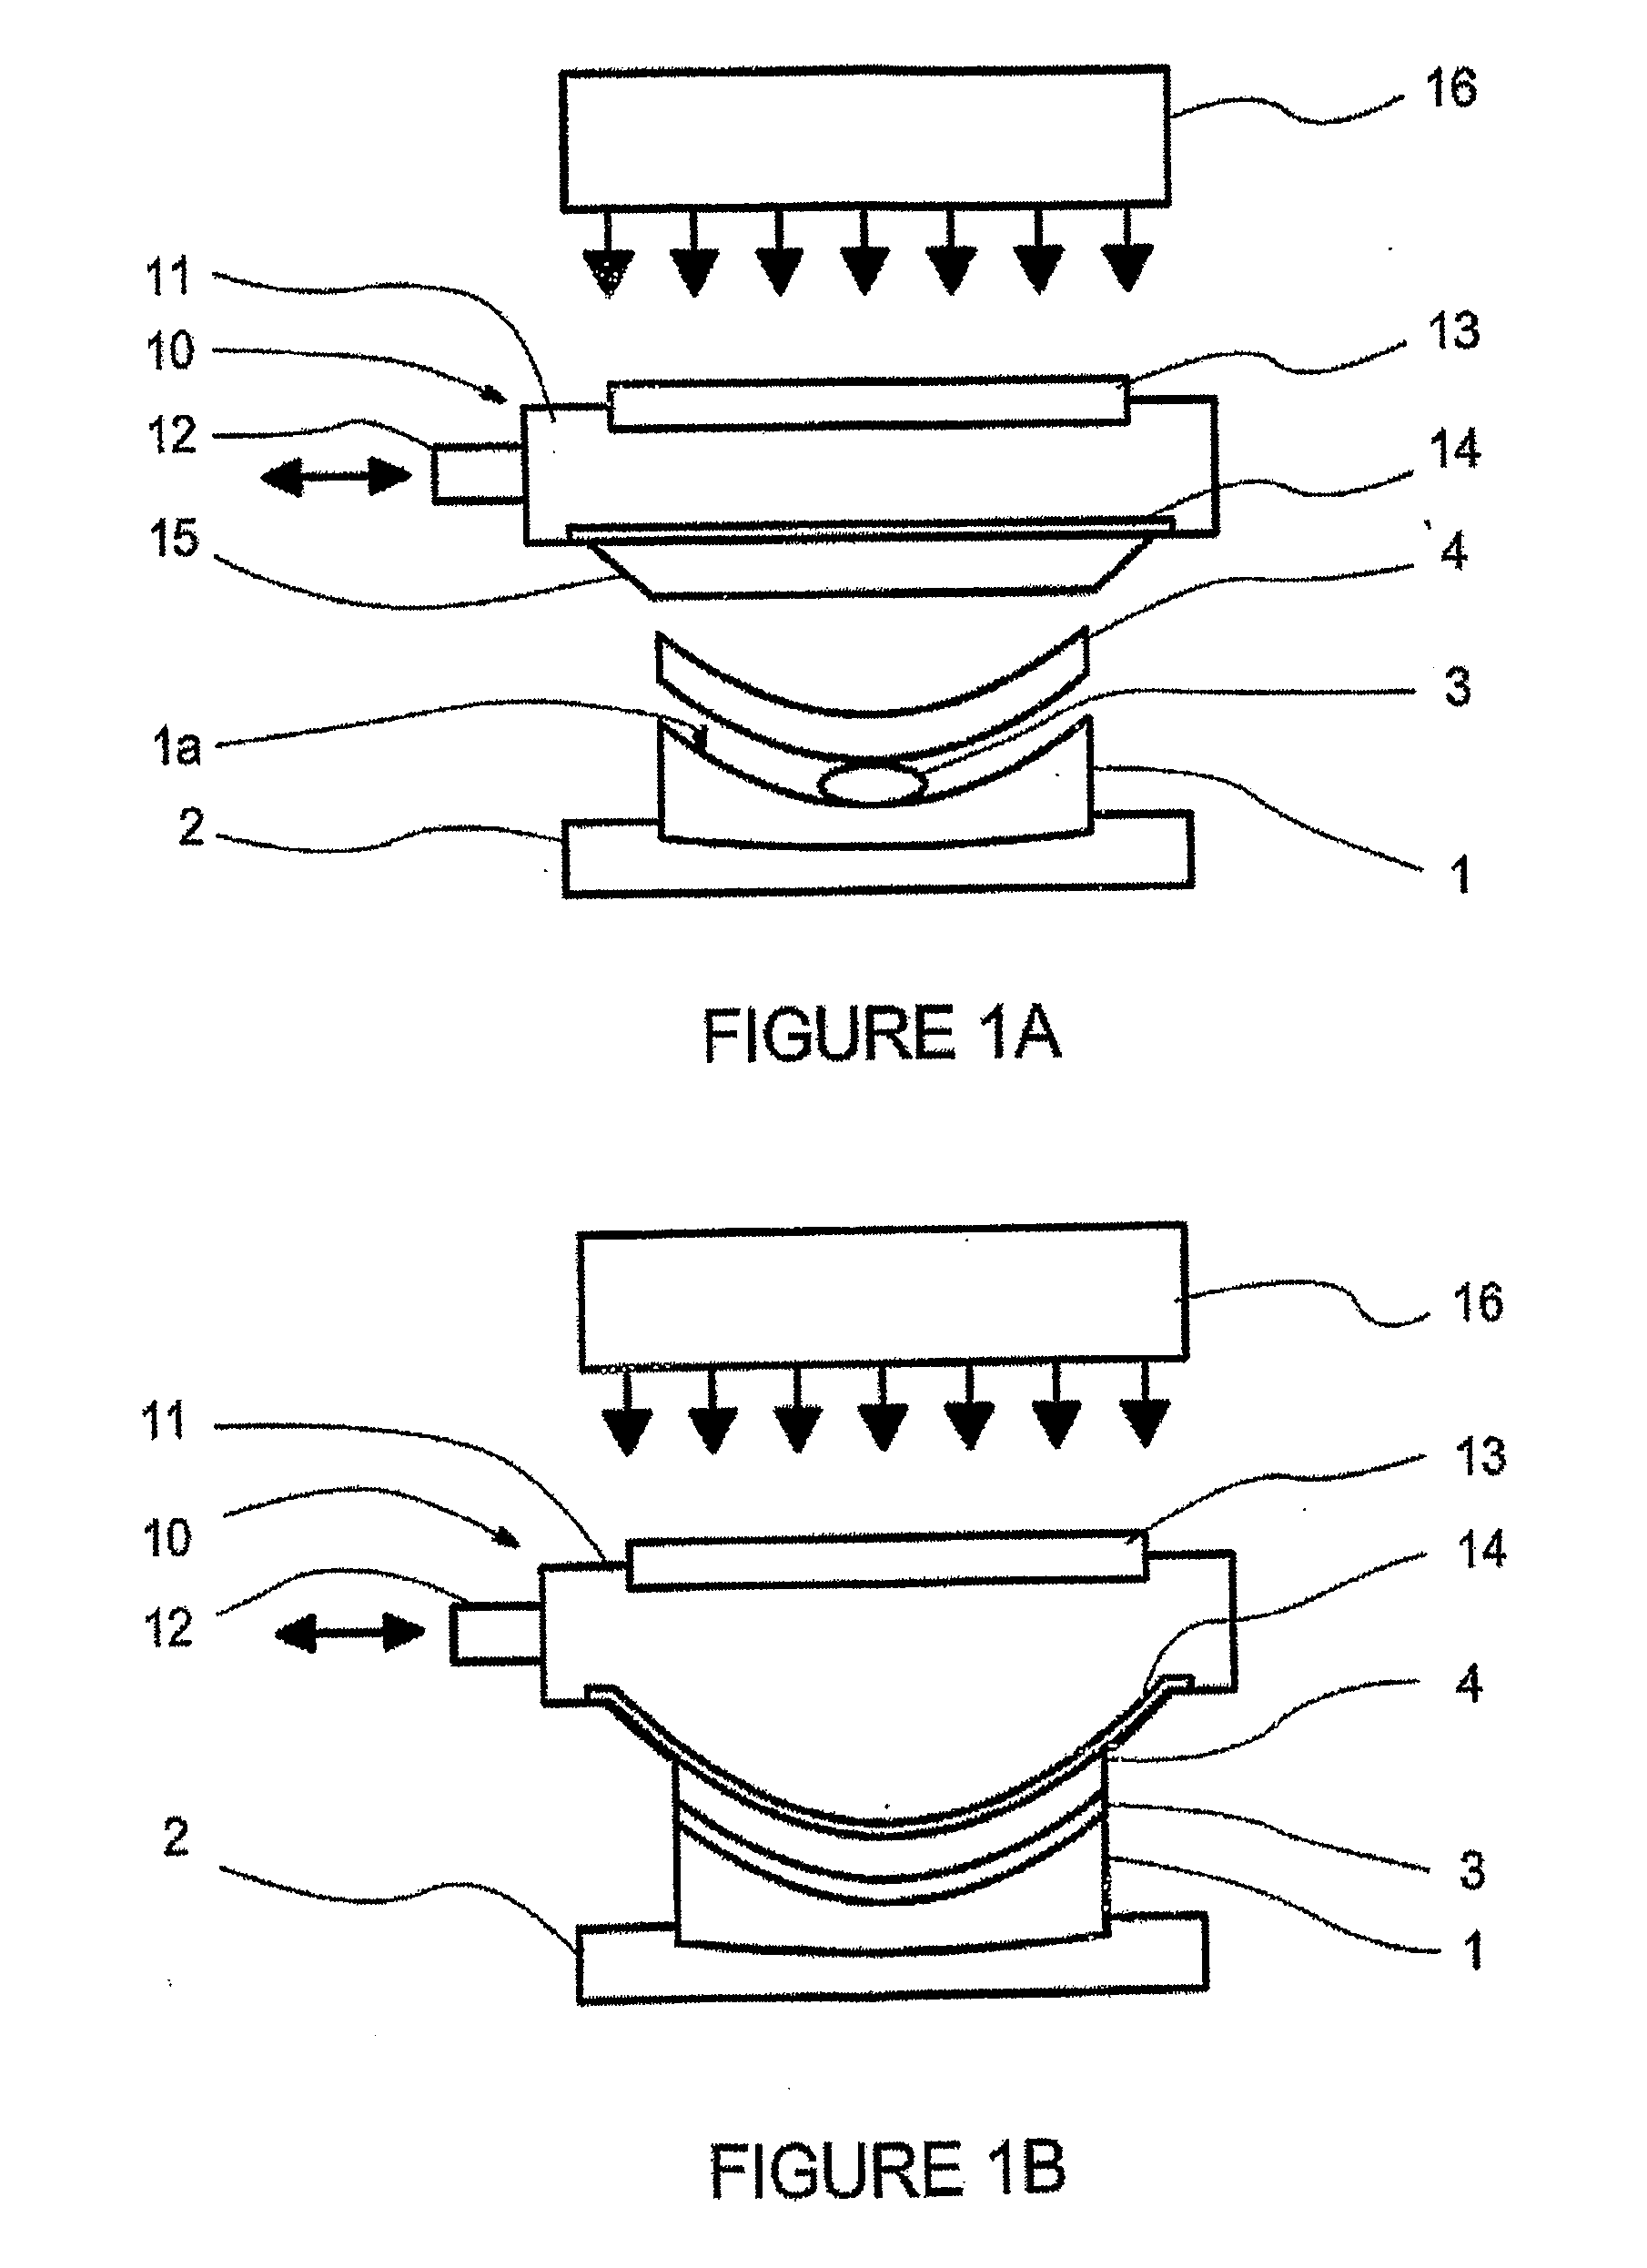 Process for Making a Coated Optical Lens Free of Visible Fining Lines